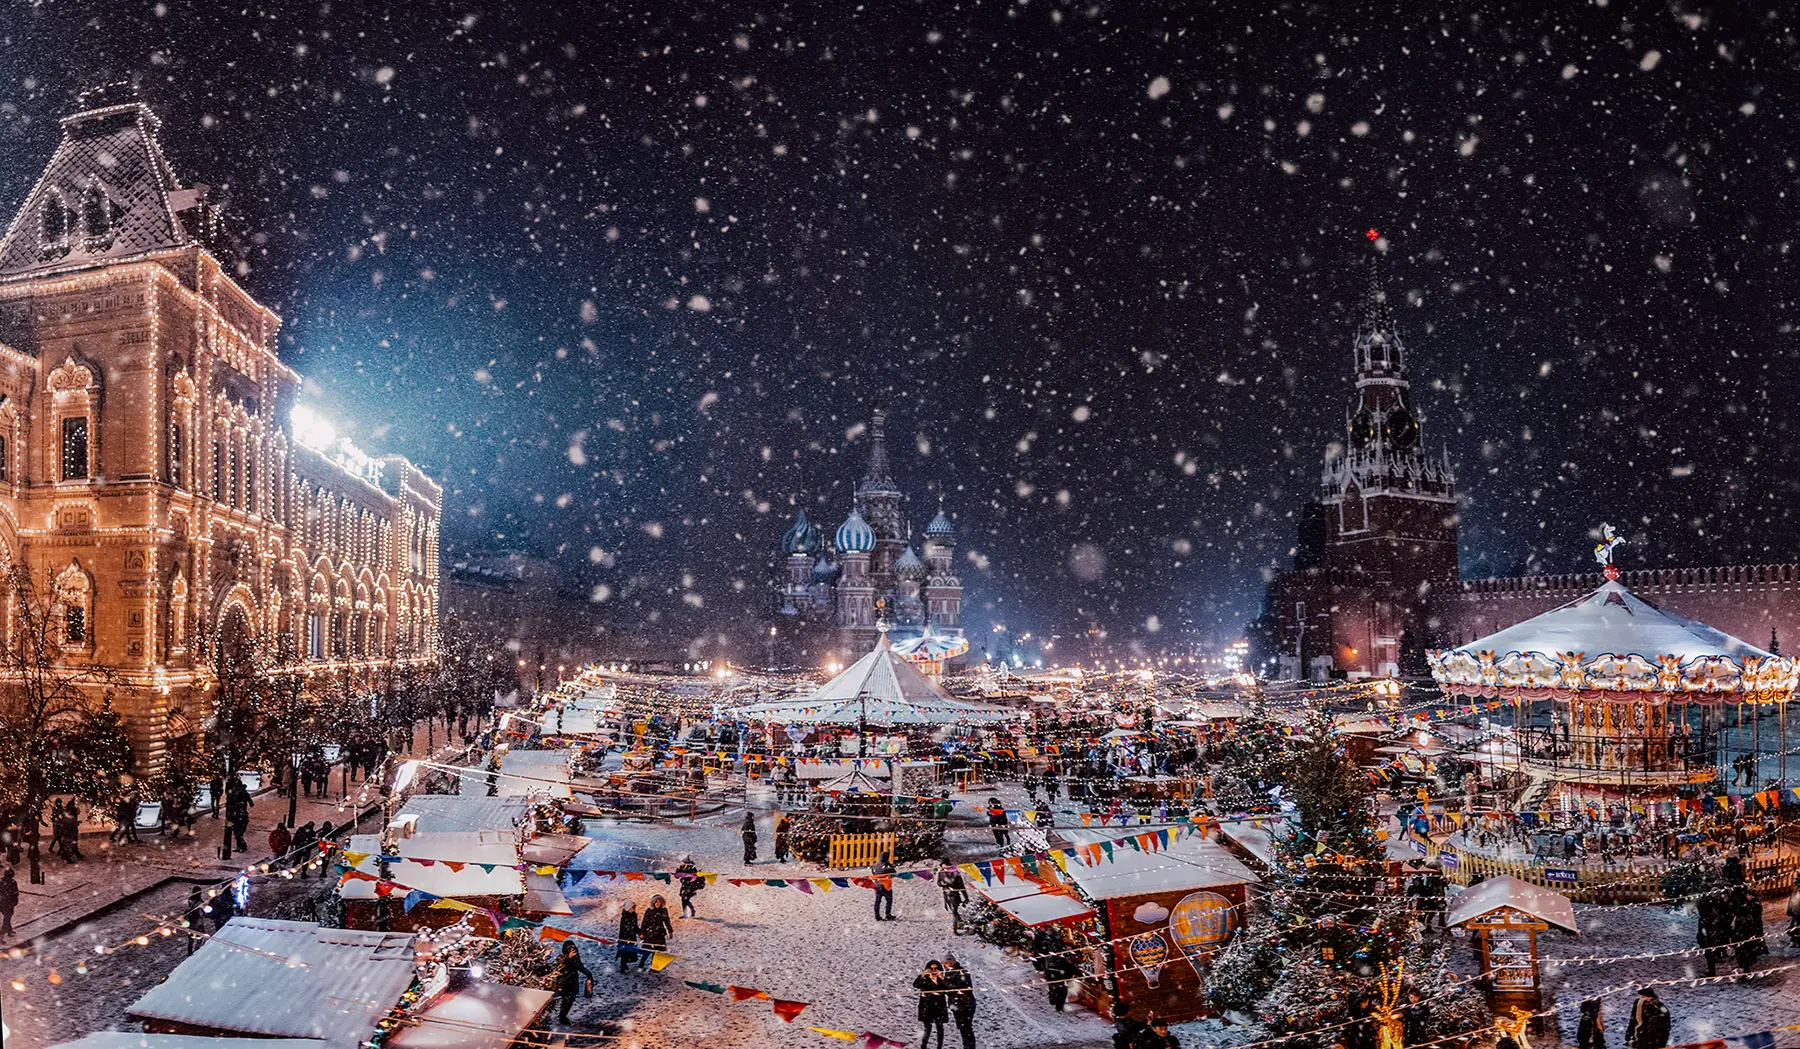 Christmas market at Red Square